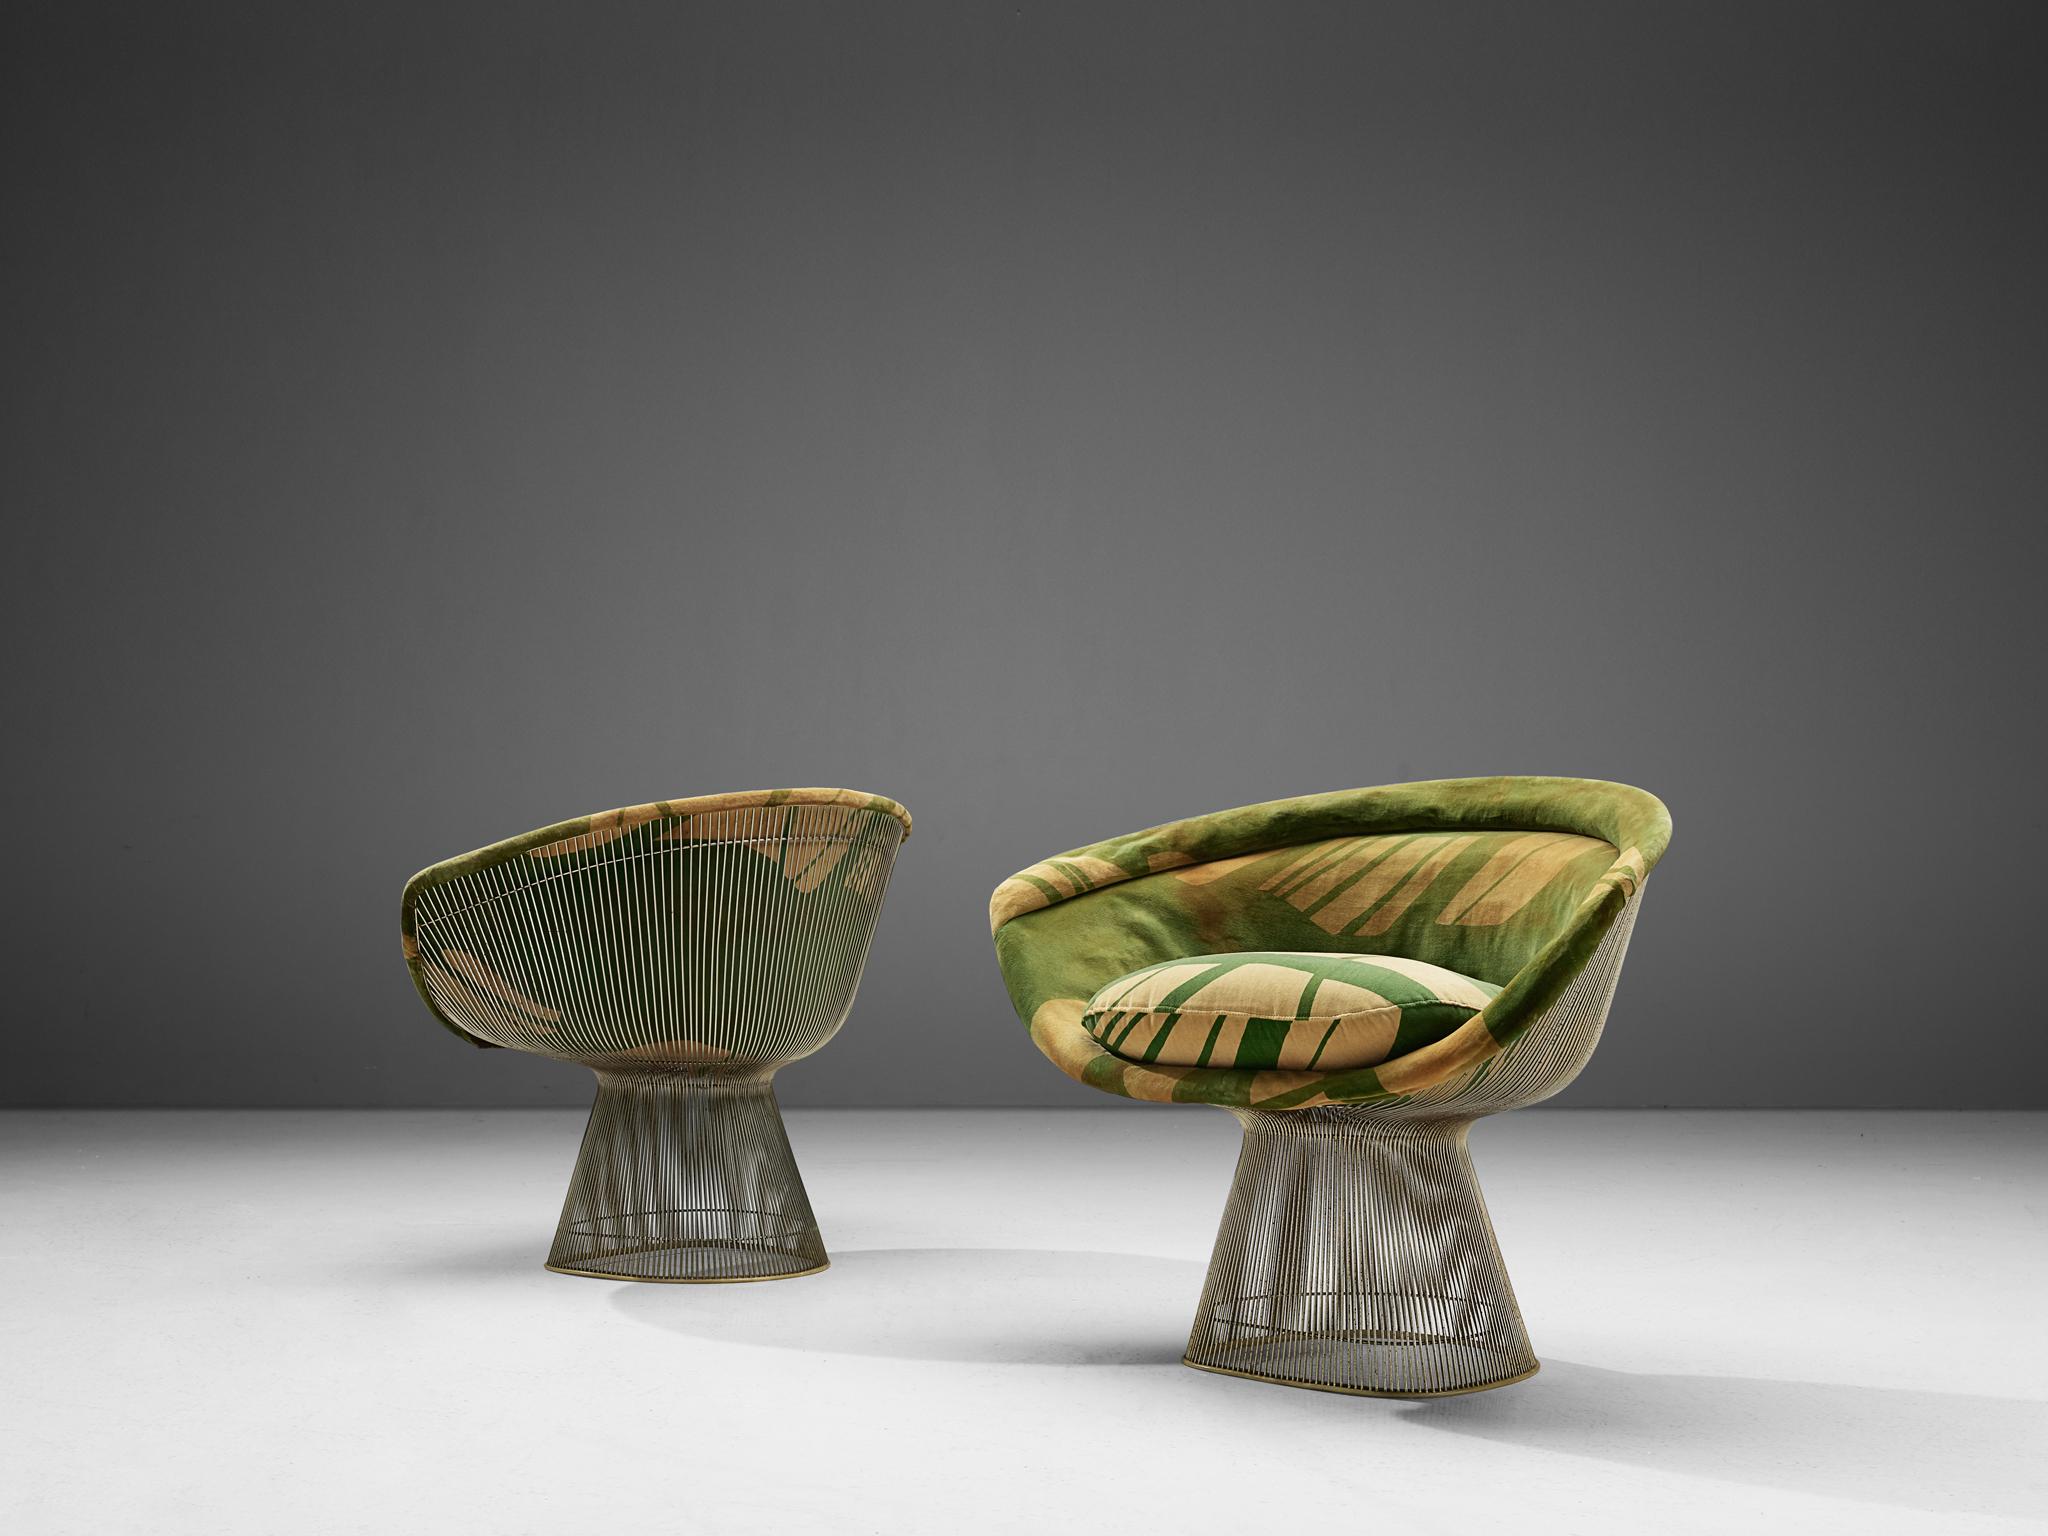 Warren Platner, lounge chairs, metal and yellow-green fabric, United States, 1966. 

This iconic pair by Warren Platner (1919-2006) is created by welding curved steel rods to circular and semi-circular frames, simultaneously serving as structure